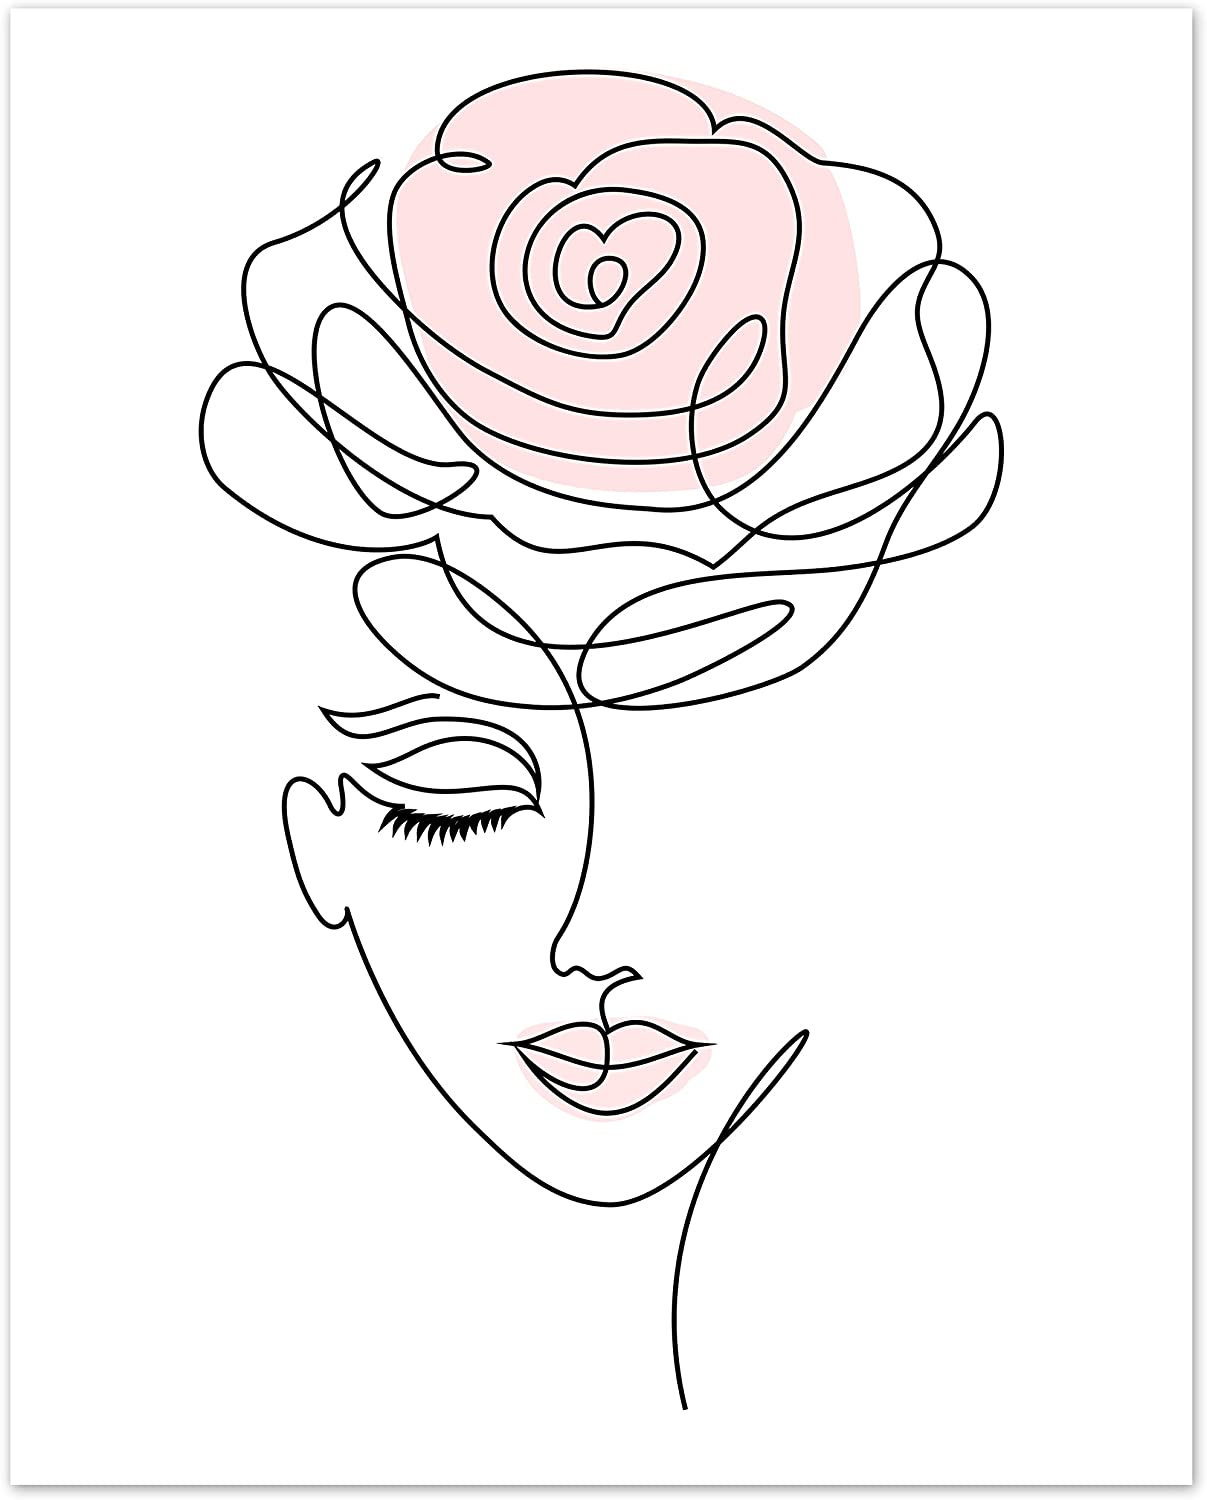 Boho Minimalist Black and White Face Flower Line Art Blush Pink Abstract Farmhouse Botanical Wall Art Posters Home Living Room Decor Simple Aesthetic Women Picture Prints Decorations Kitchen Bedroom: Posters